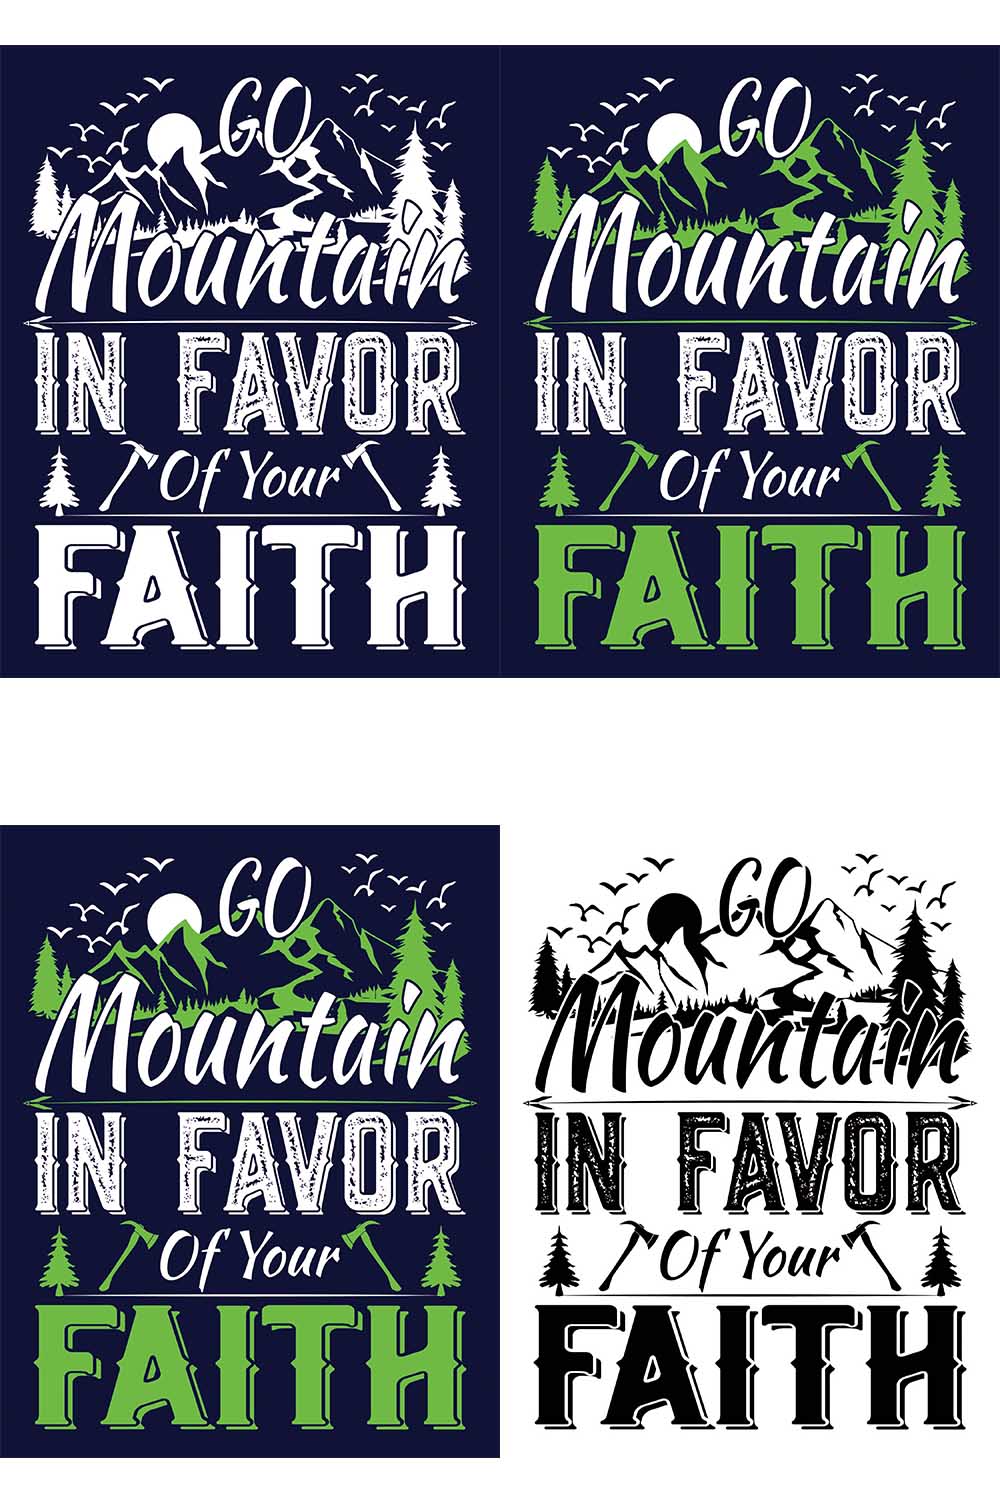 Go Mountain in favor of your Faith Camping SVG T-Shirt Design |Camping Mountain Hike T-Shirt Design | Ai, Svg, Eps, Dxf, Jpeg, Png, Instant download T-Shirt Digital Prints file pinterest preview image.